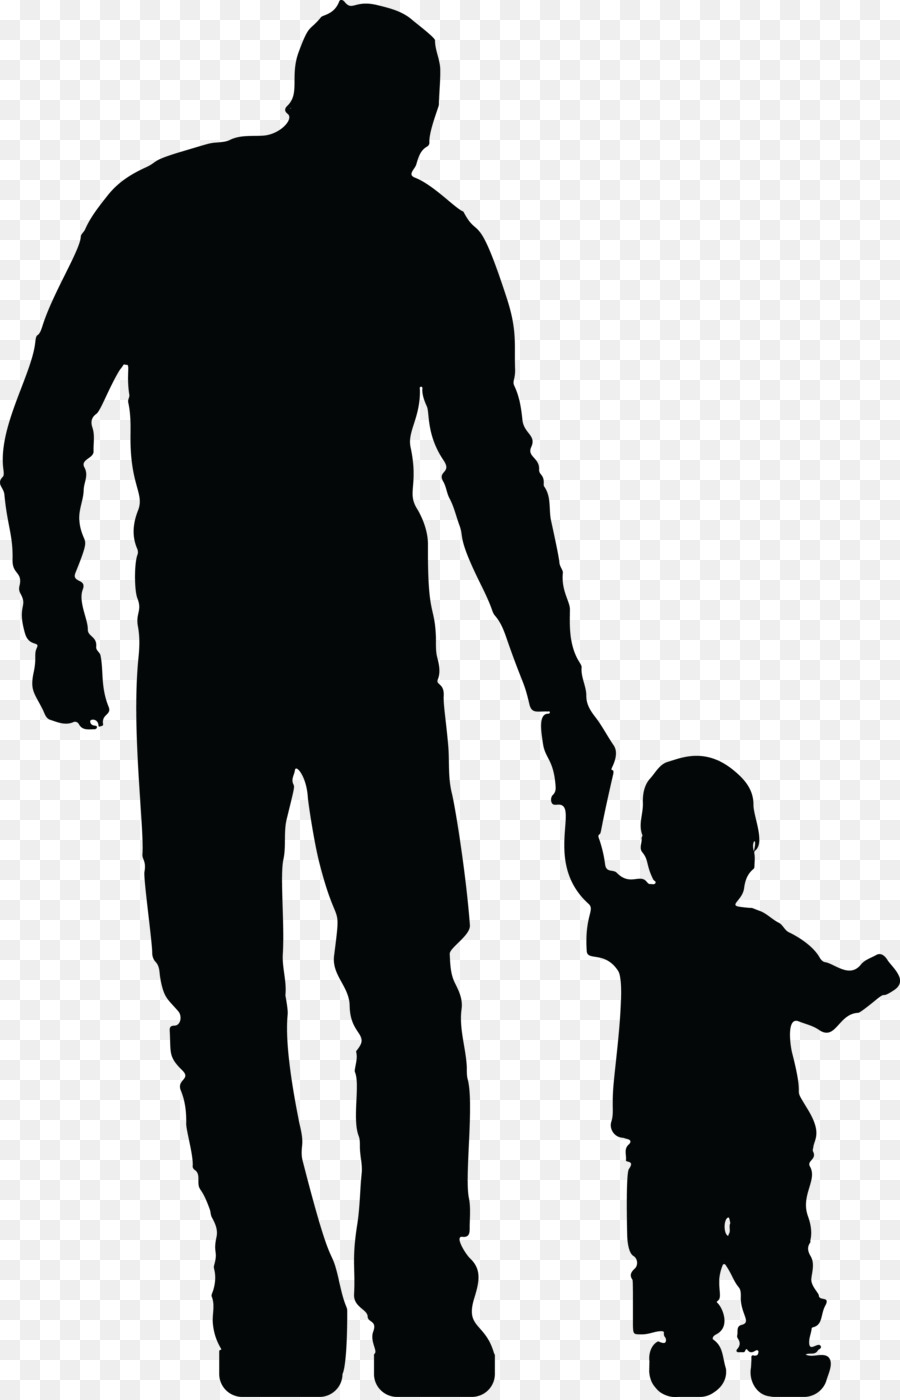 Download png download - 4000*6207 - Free Transparent Father png ...